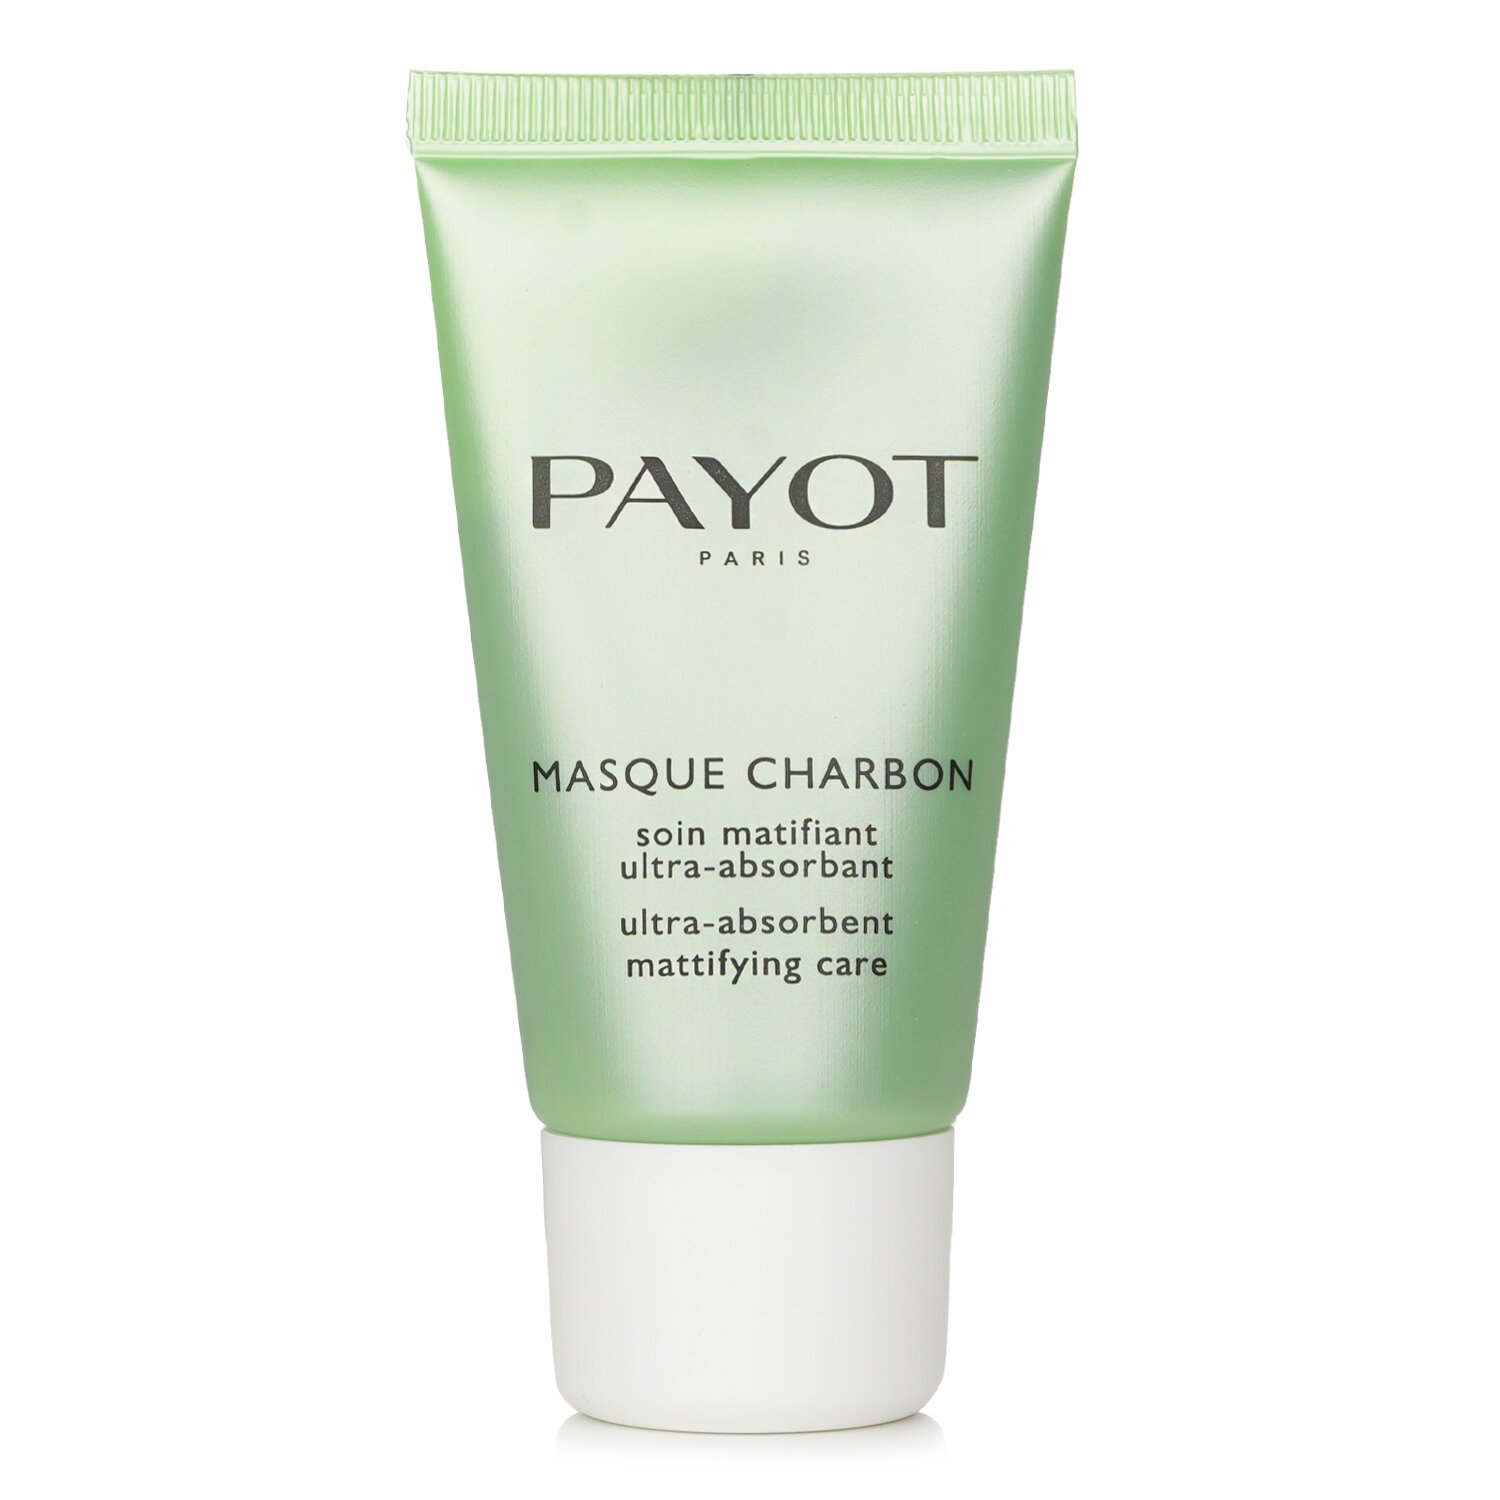 Payot Pate Grise Masque Charbon - Ultra-Absorbent Mattifying Care 50ml/1.6oz